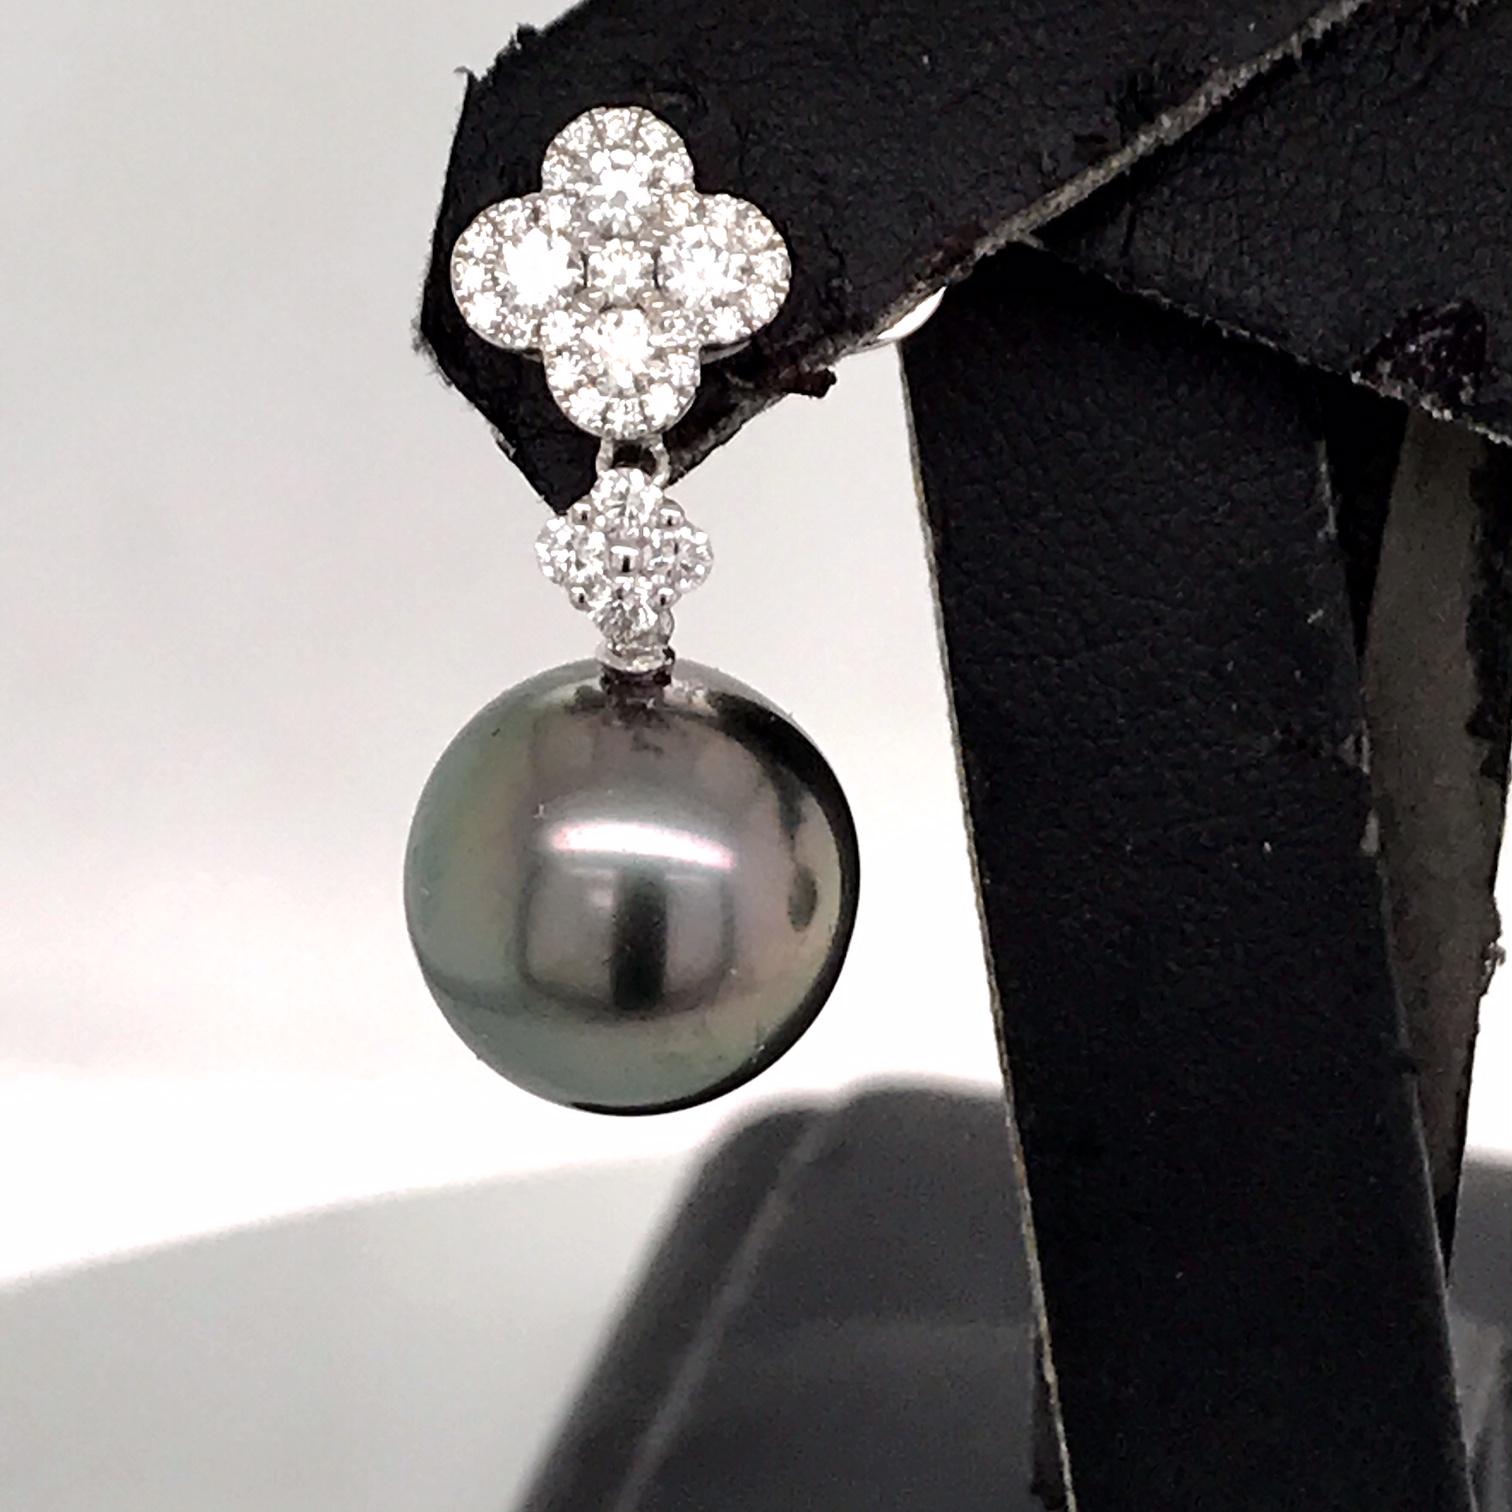 18K White gold drop earrings featuring two Tahitian Pearls measuring 11-12 mm with 8 round brilliants on top weighing 0.37 carats flanked with 58 smaller diamonds weighing 0.40 carats.
Color G-H
Clarity SI

Width of top cluster: 3/8